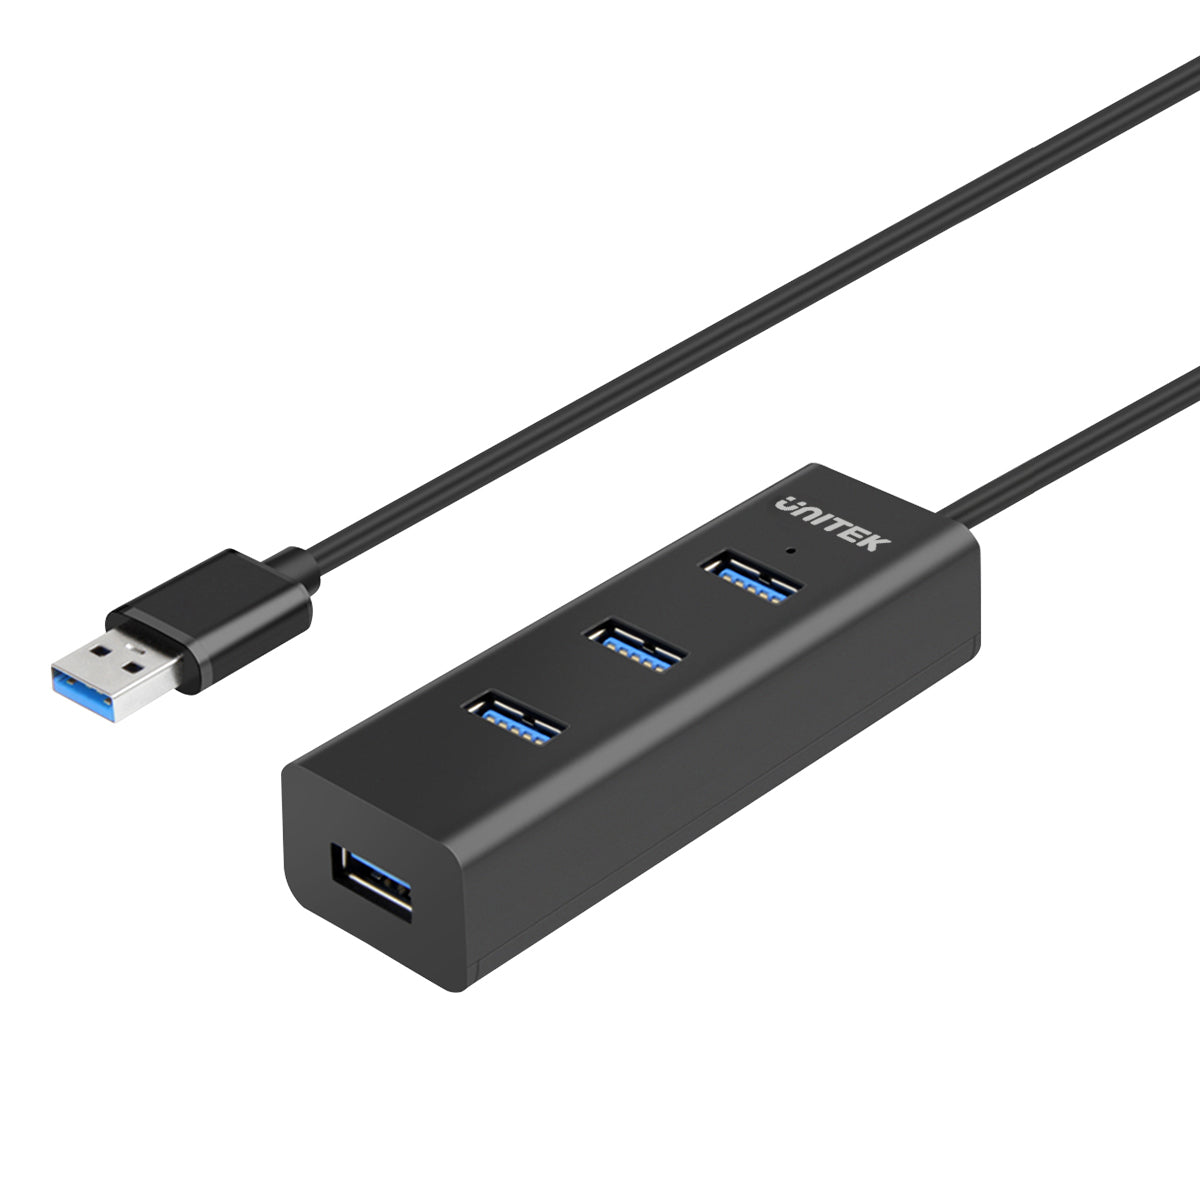 Qeefun 4-Port USB 3.0 Hub with 2ft Extended Cable with Individual LED